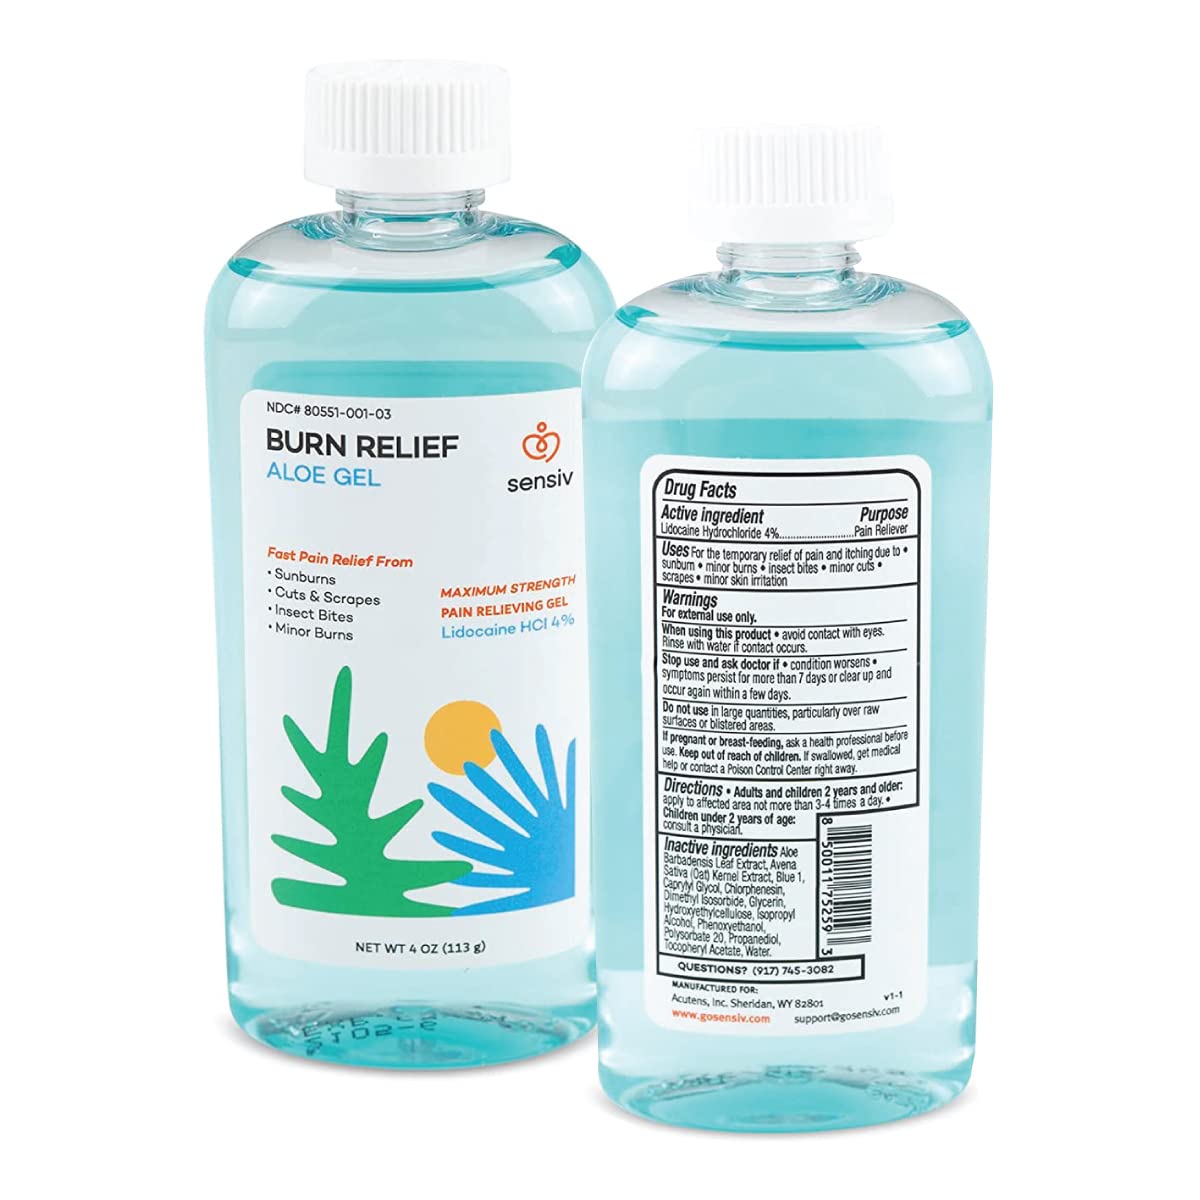 Sensiv Aloe Vera Gel for Sunburn Relief with Lidocaine Maximum Strength 4%, Solar Recovery for Cooling & Soothing